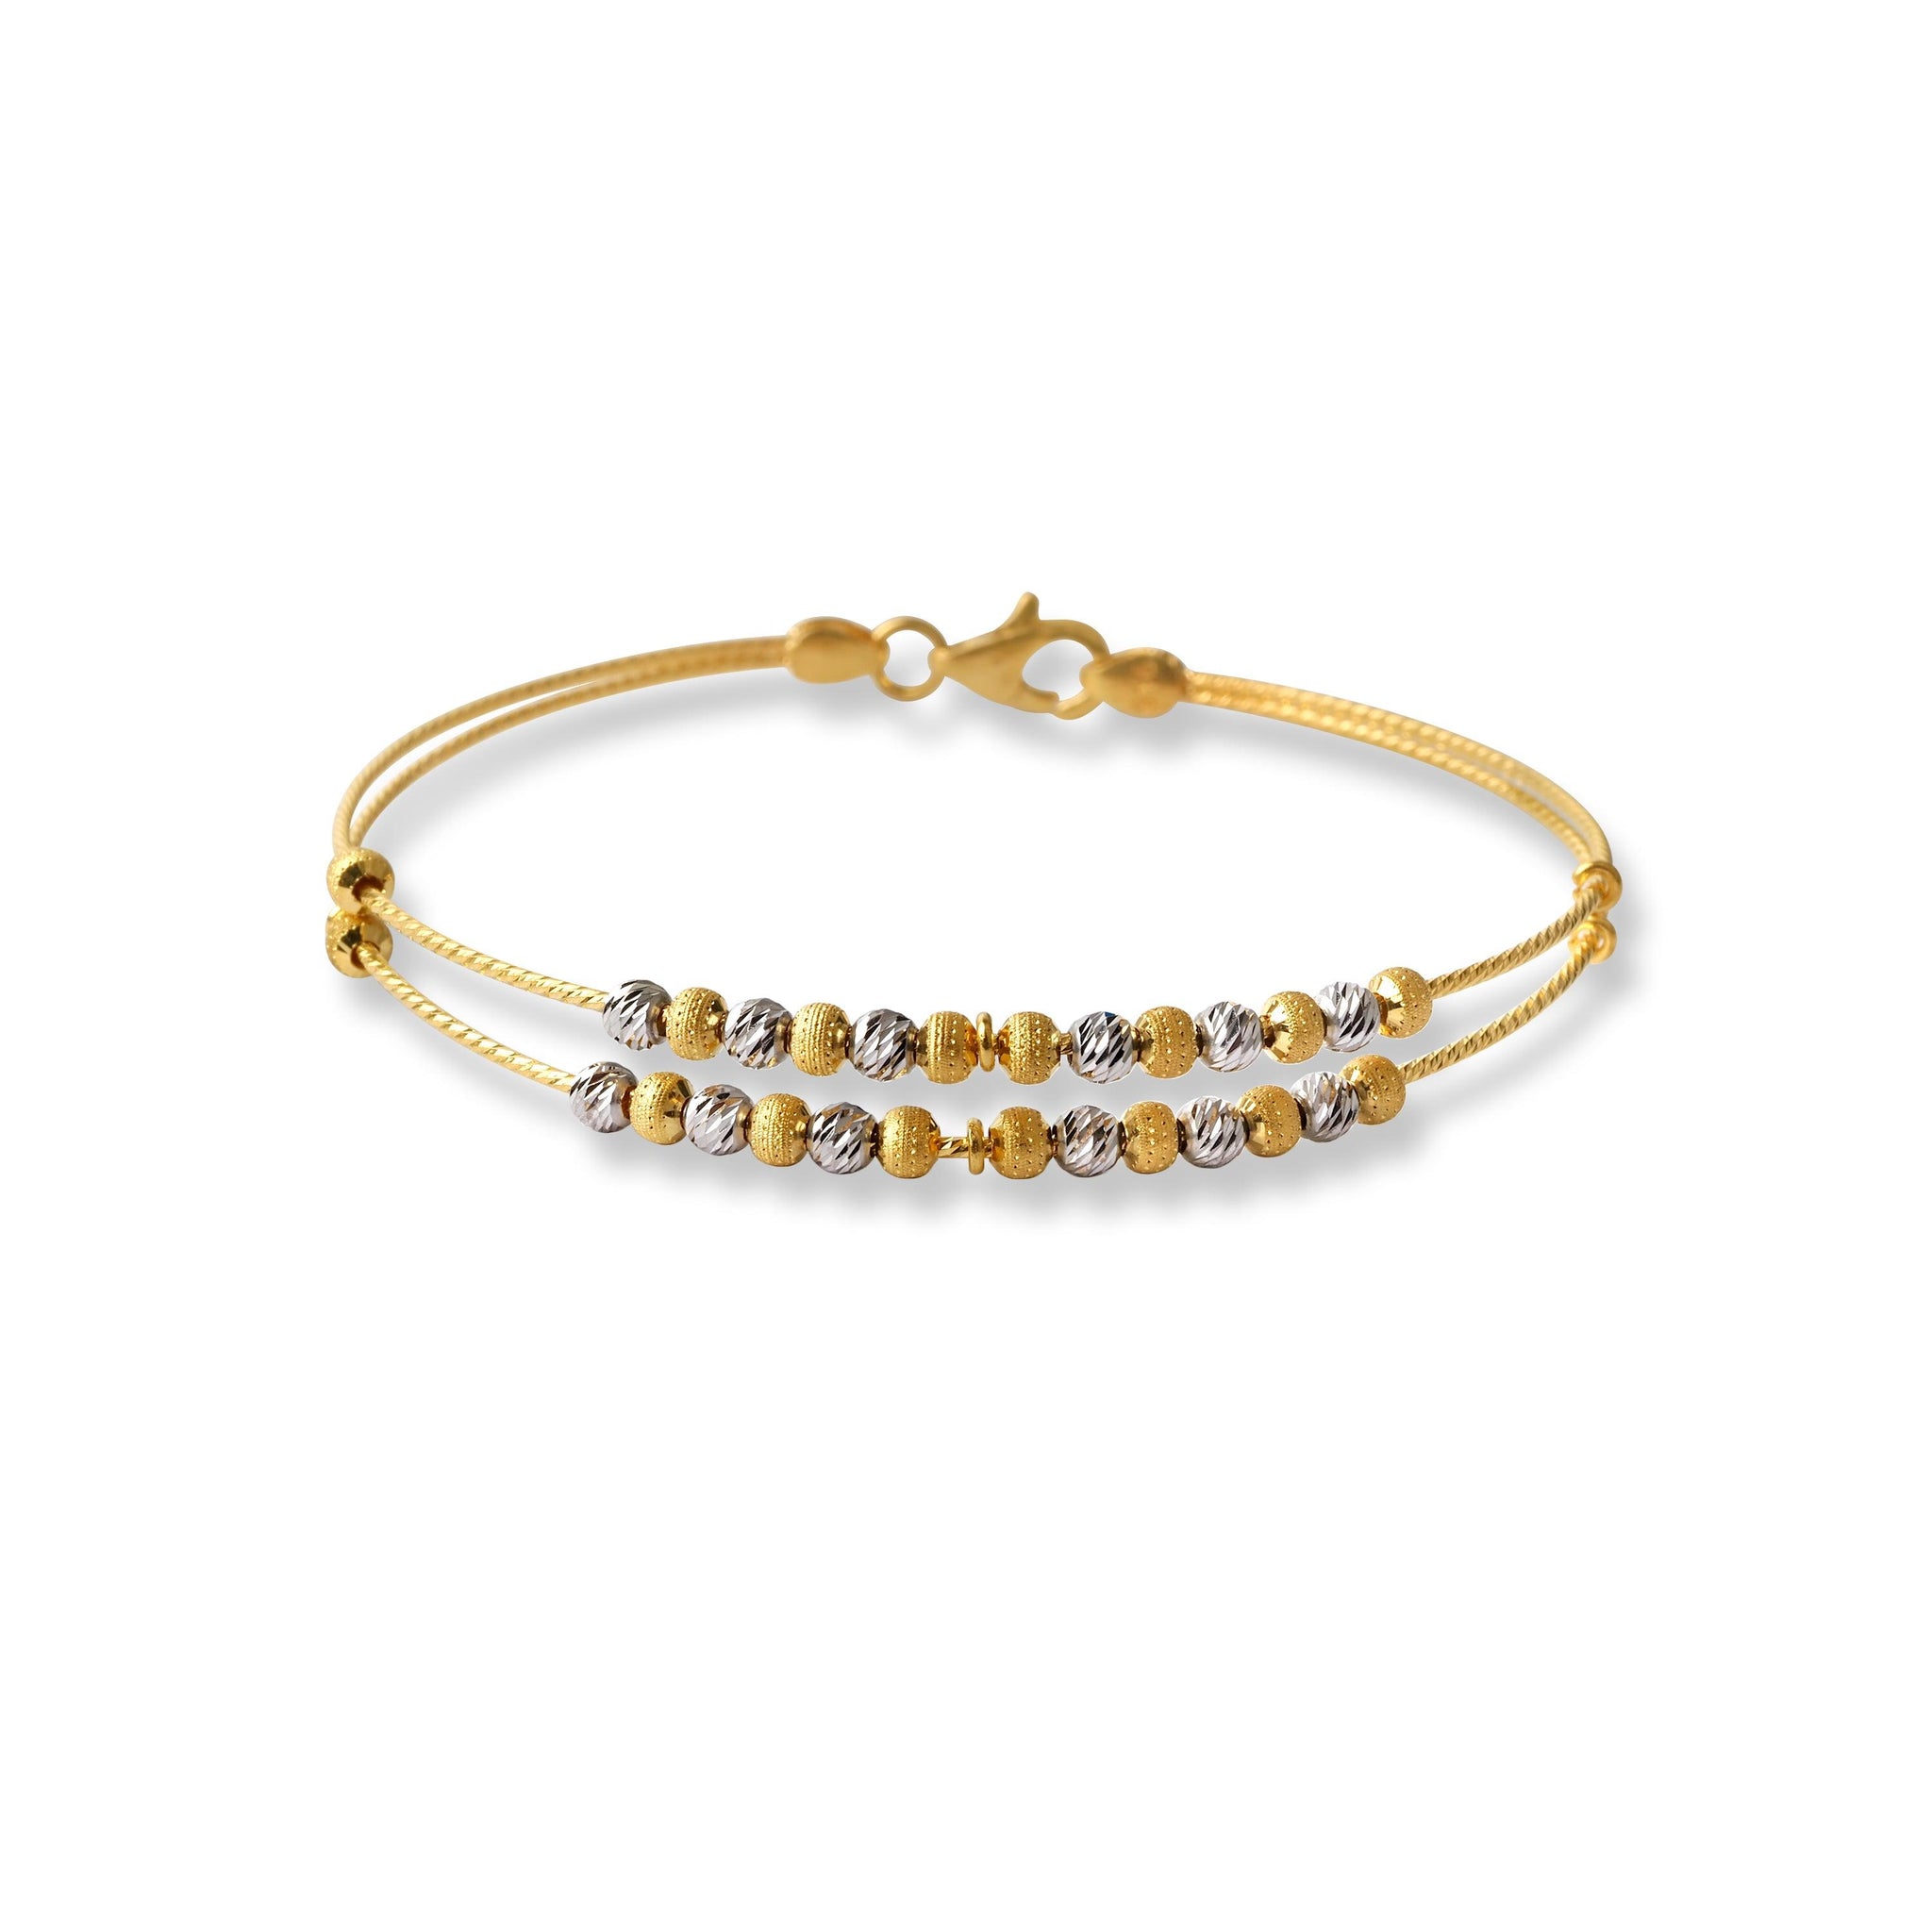 22ct Gold Rhodium Plated Beads Bangle With Rounded Trigger Clasp (7.2g) B-8445